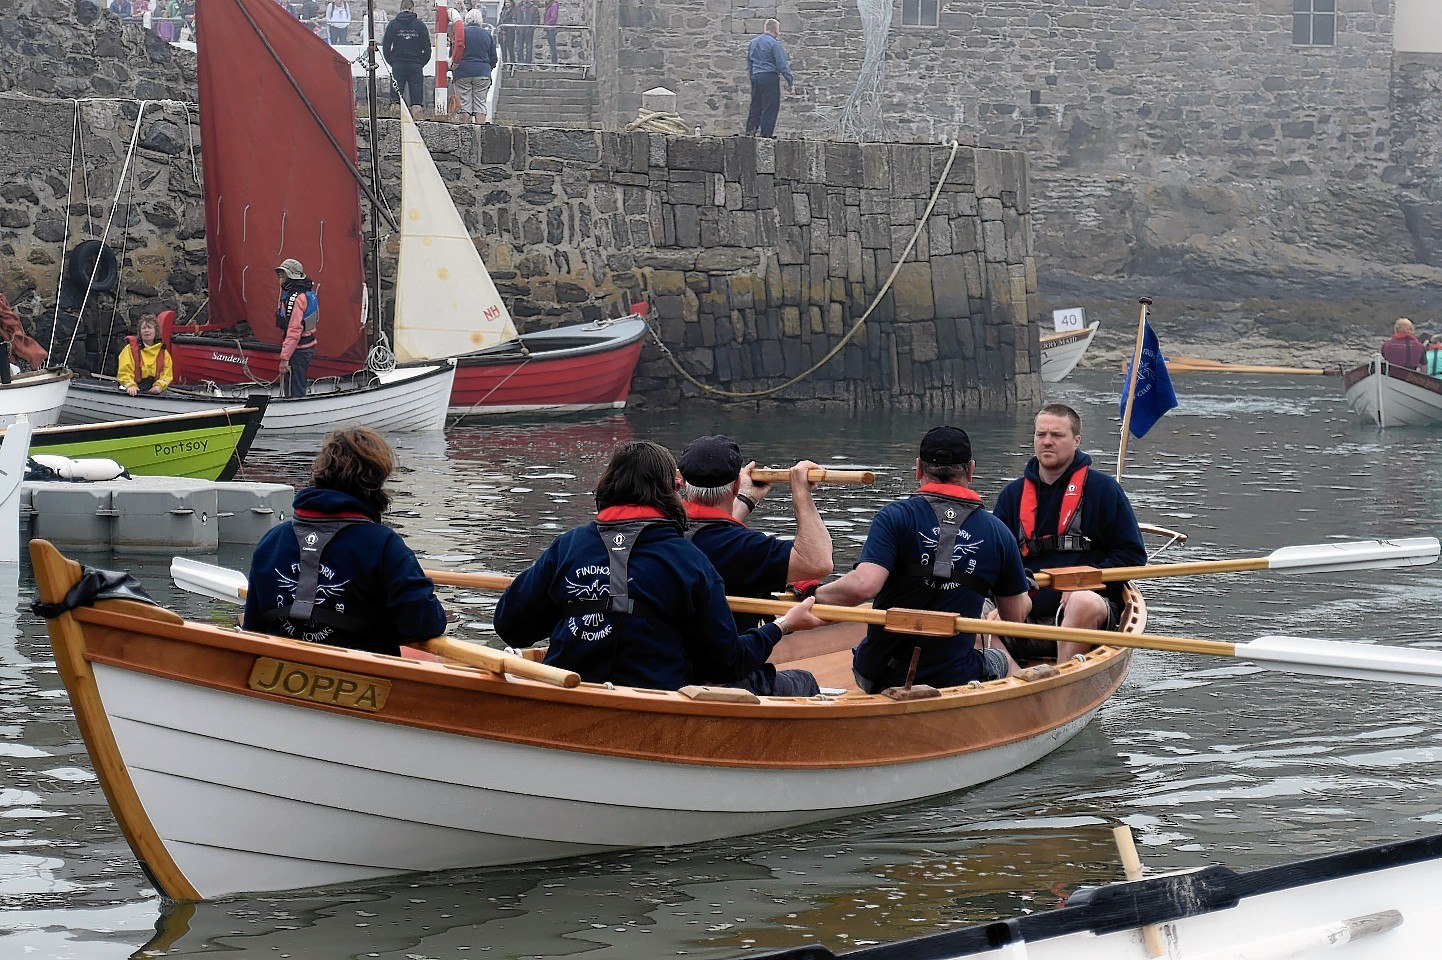 Locals feared the house would damage Portsoy Boat Festival.